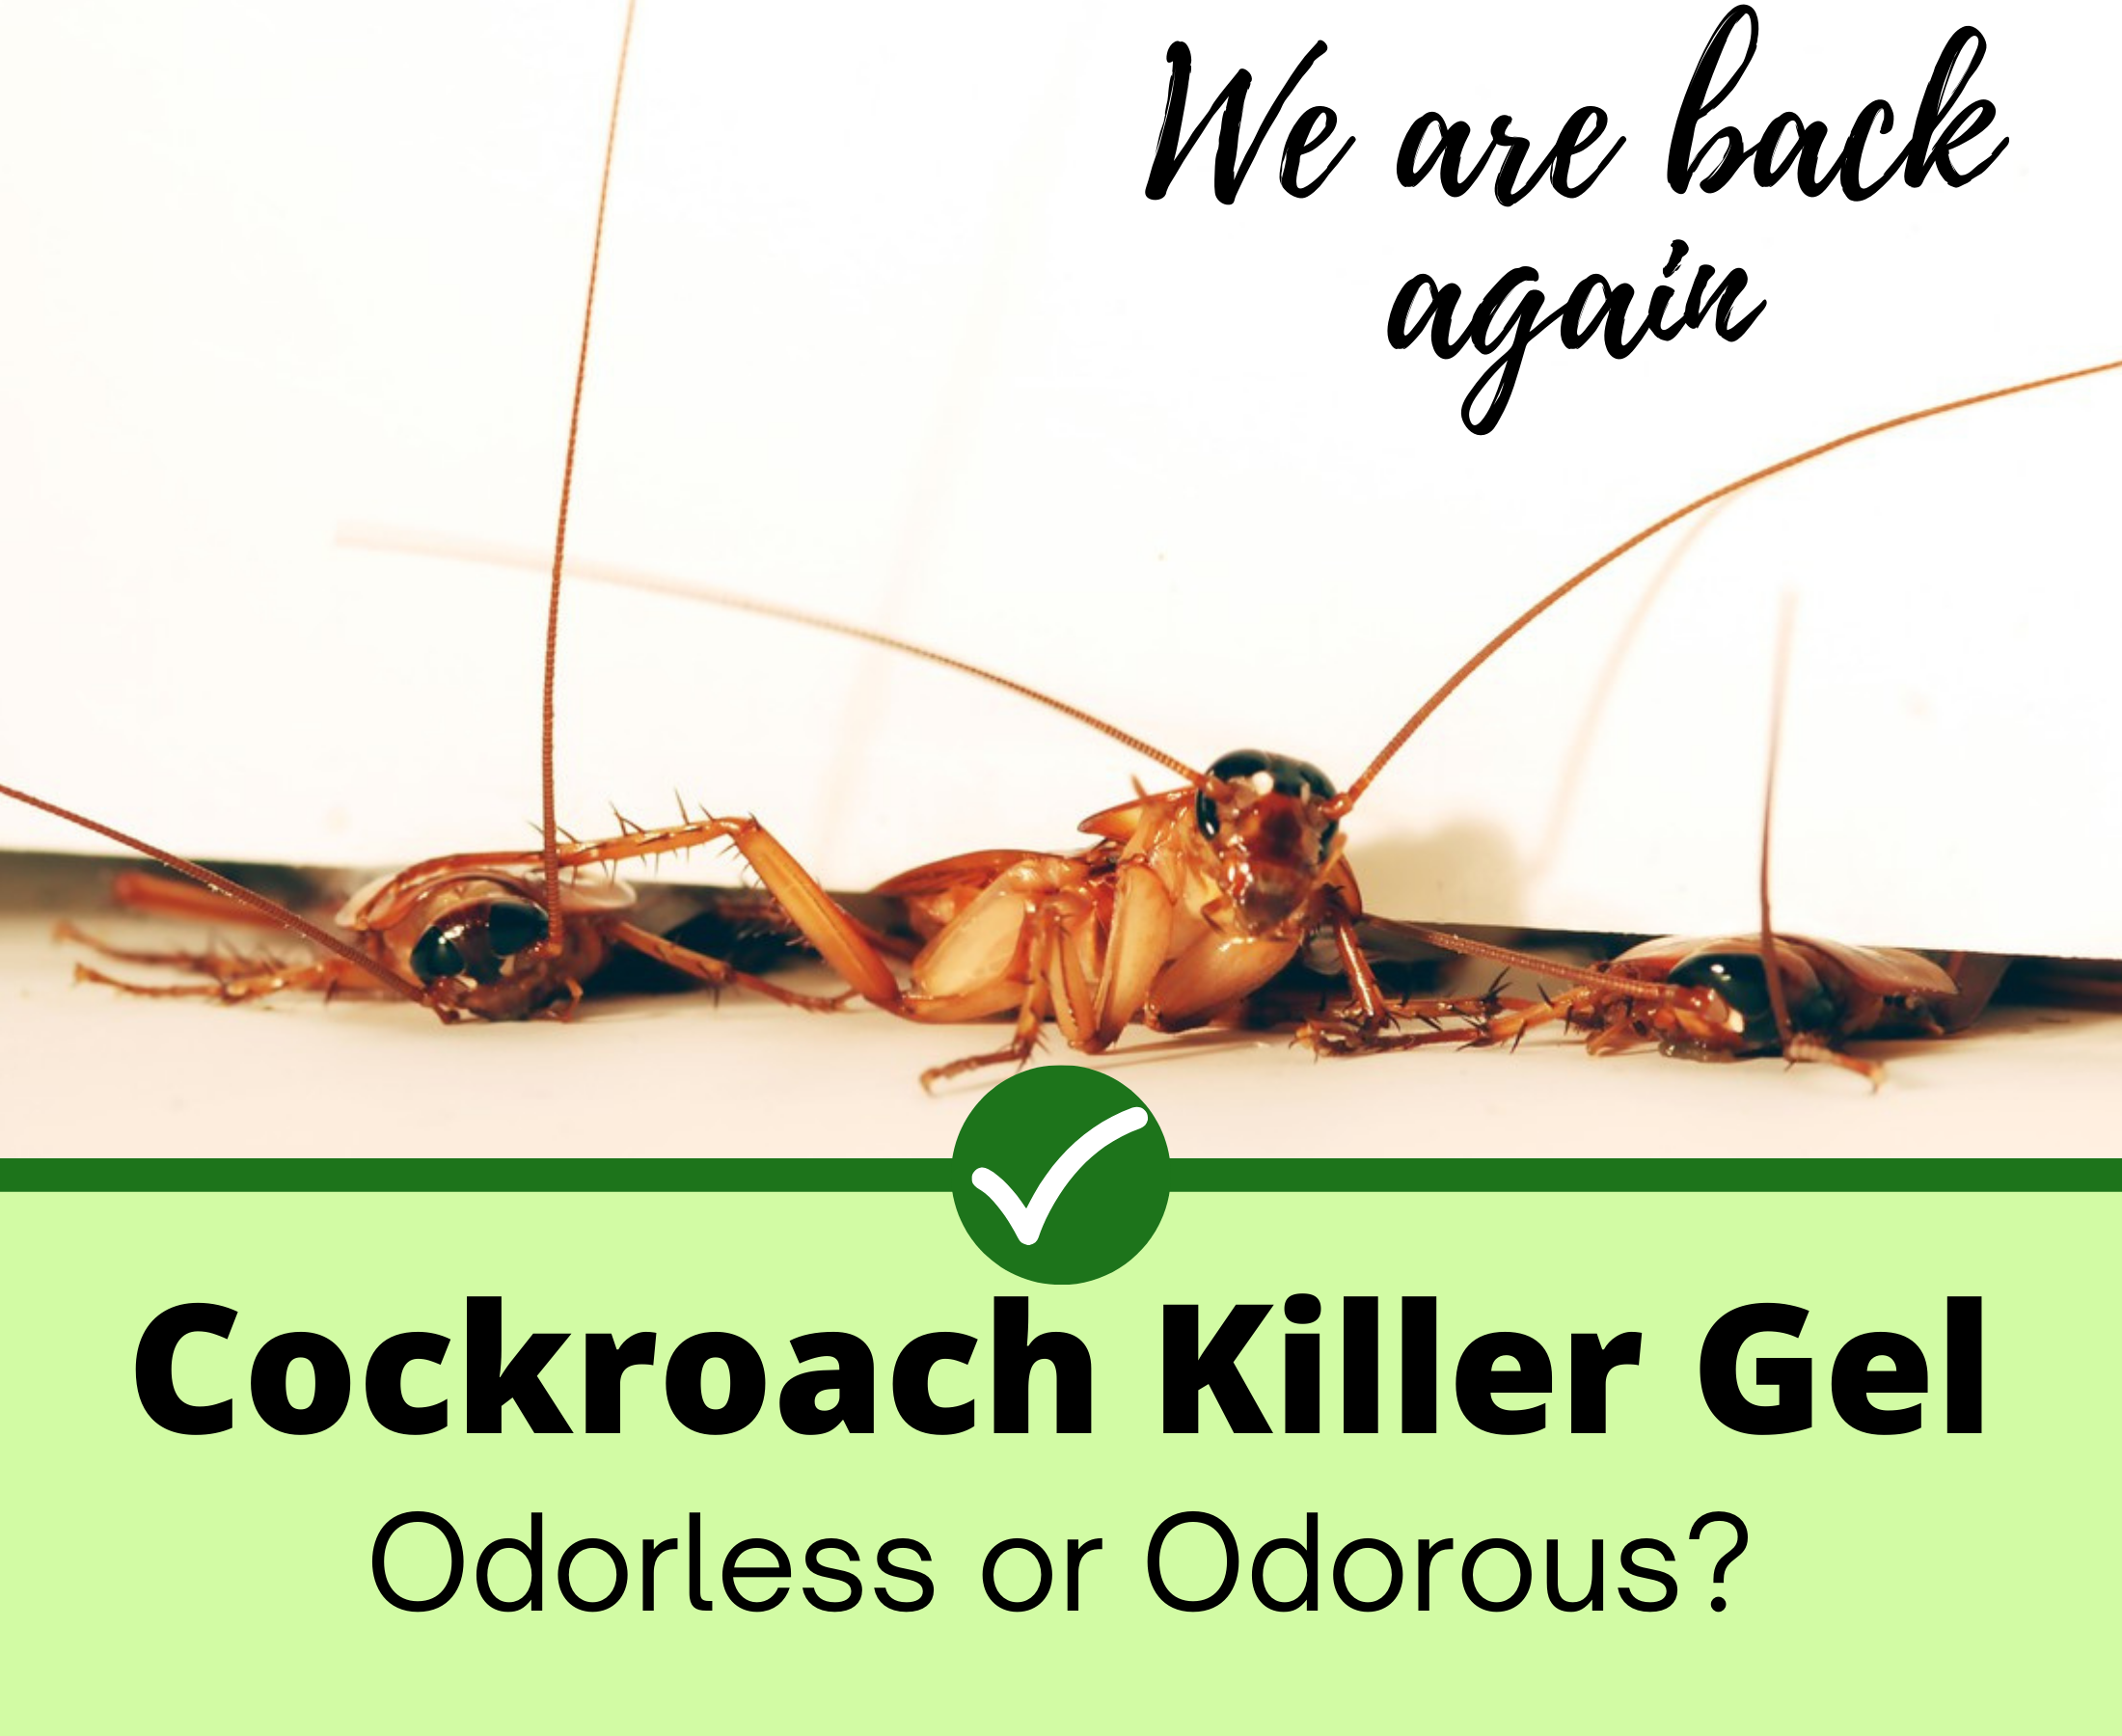 Cockroach pest control - Odorless or odorous?